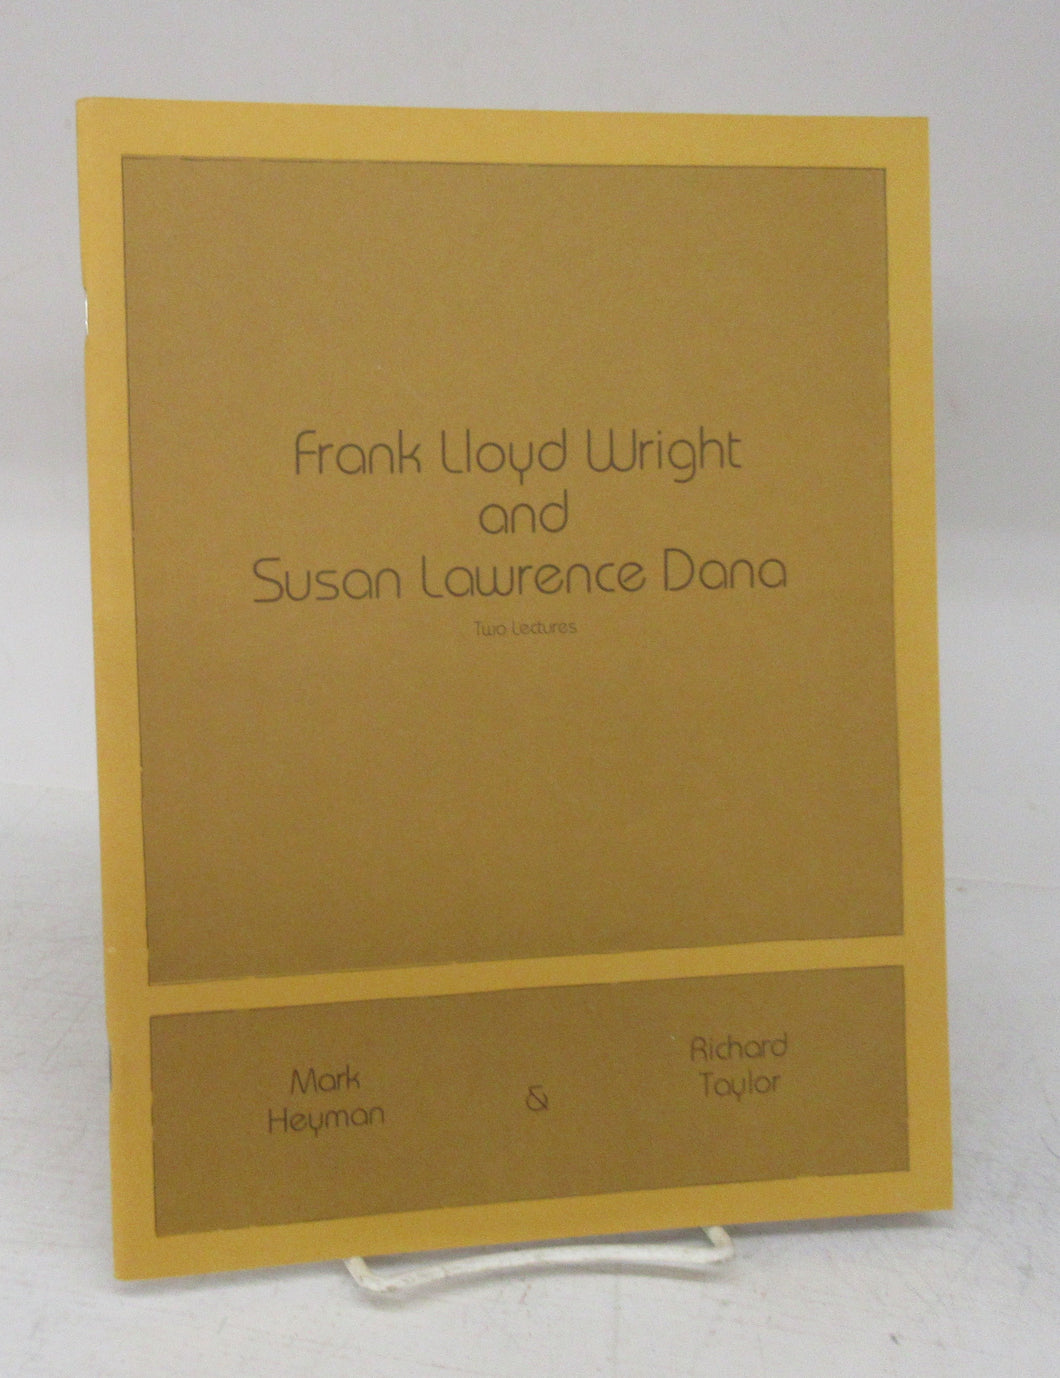 Frank Lloyd Wright and Susan Lawrence Dana: Two Lectures